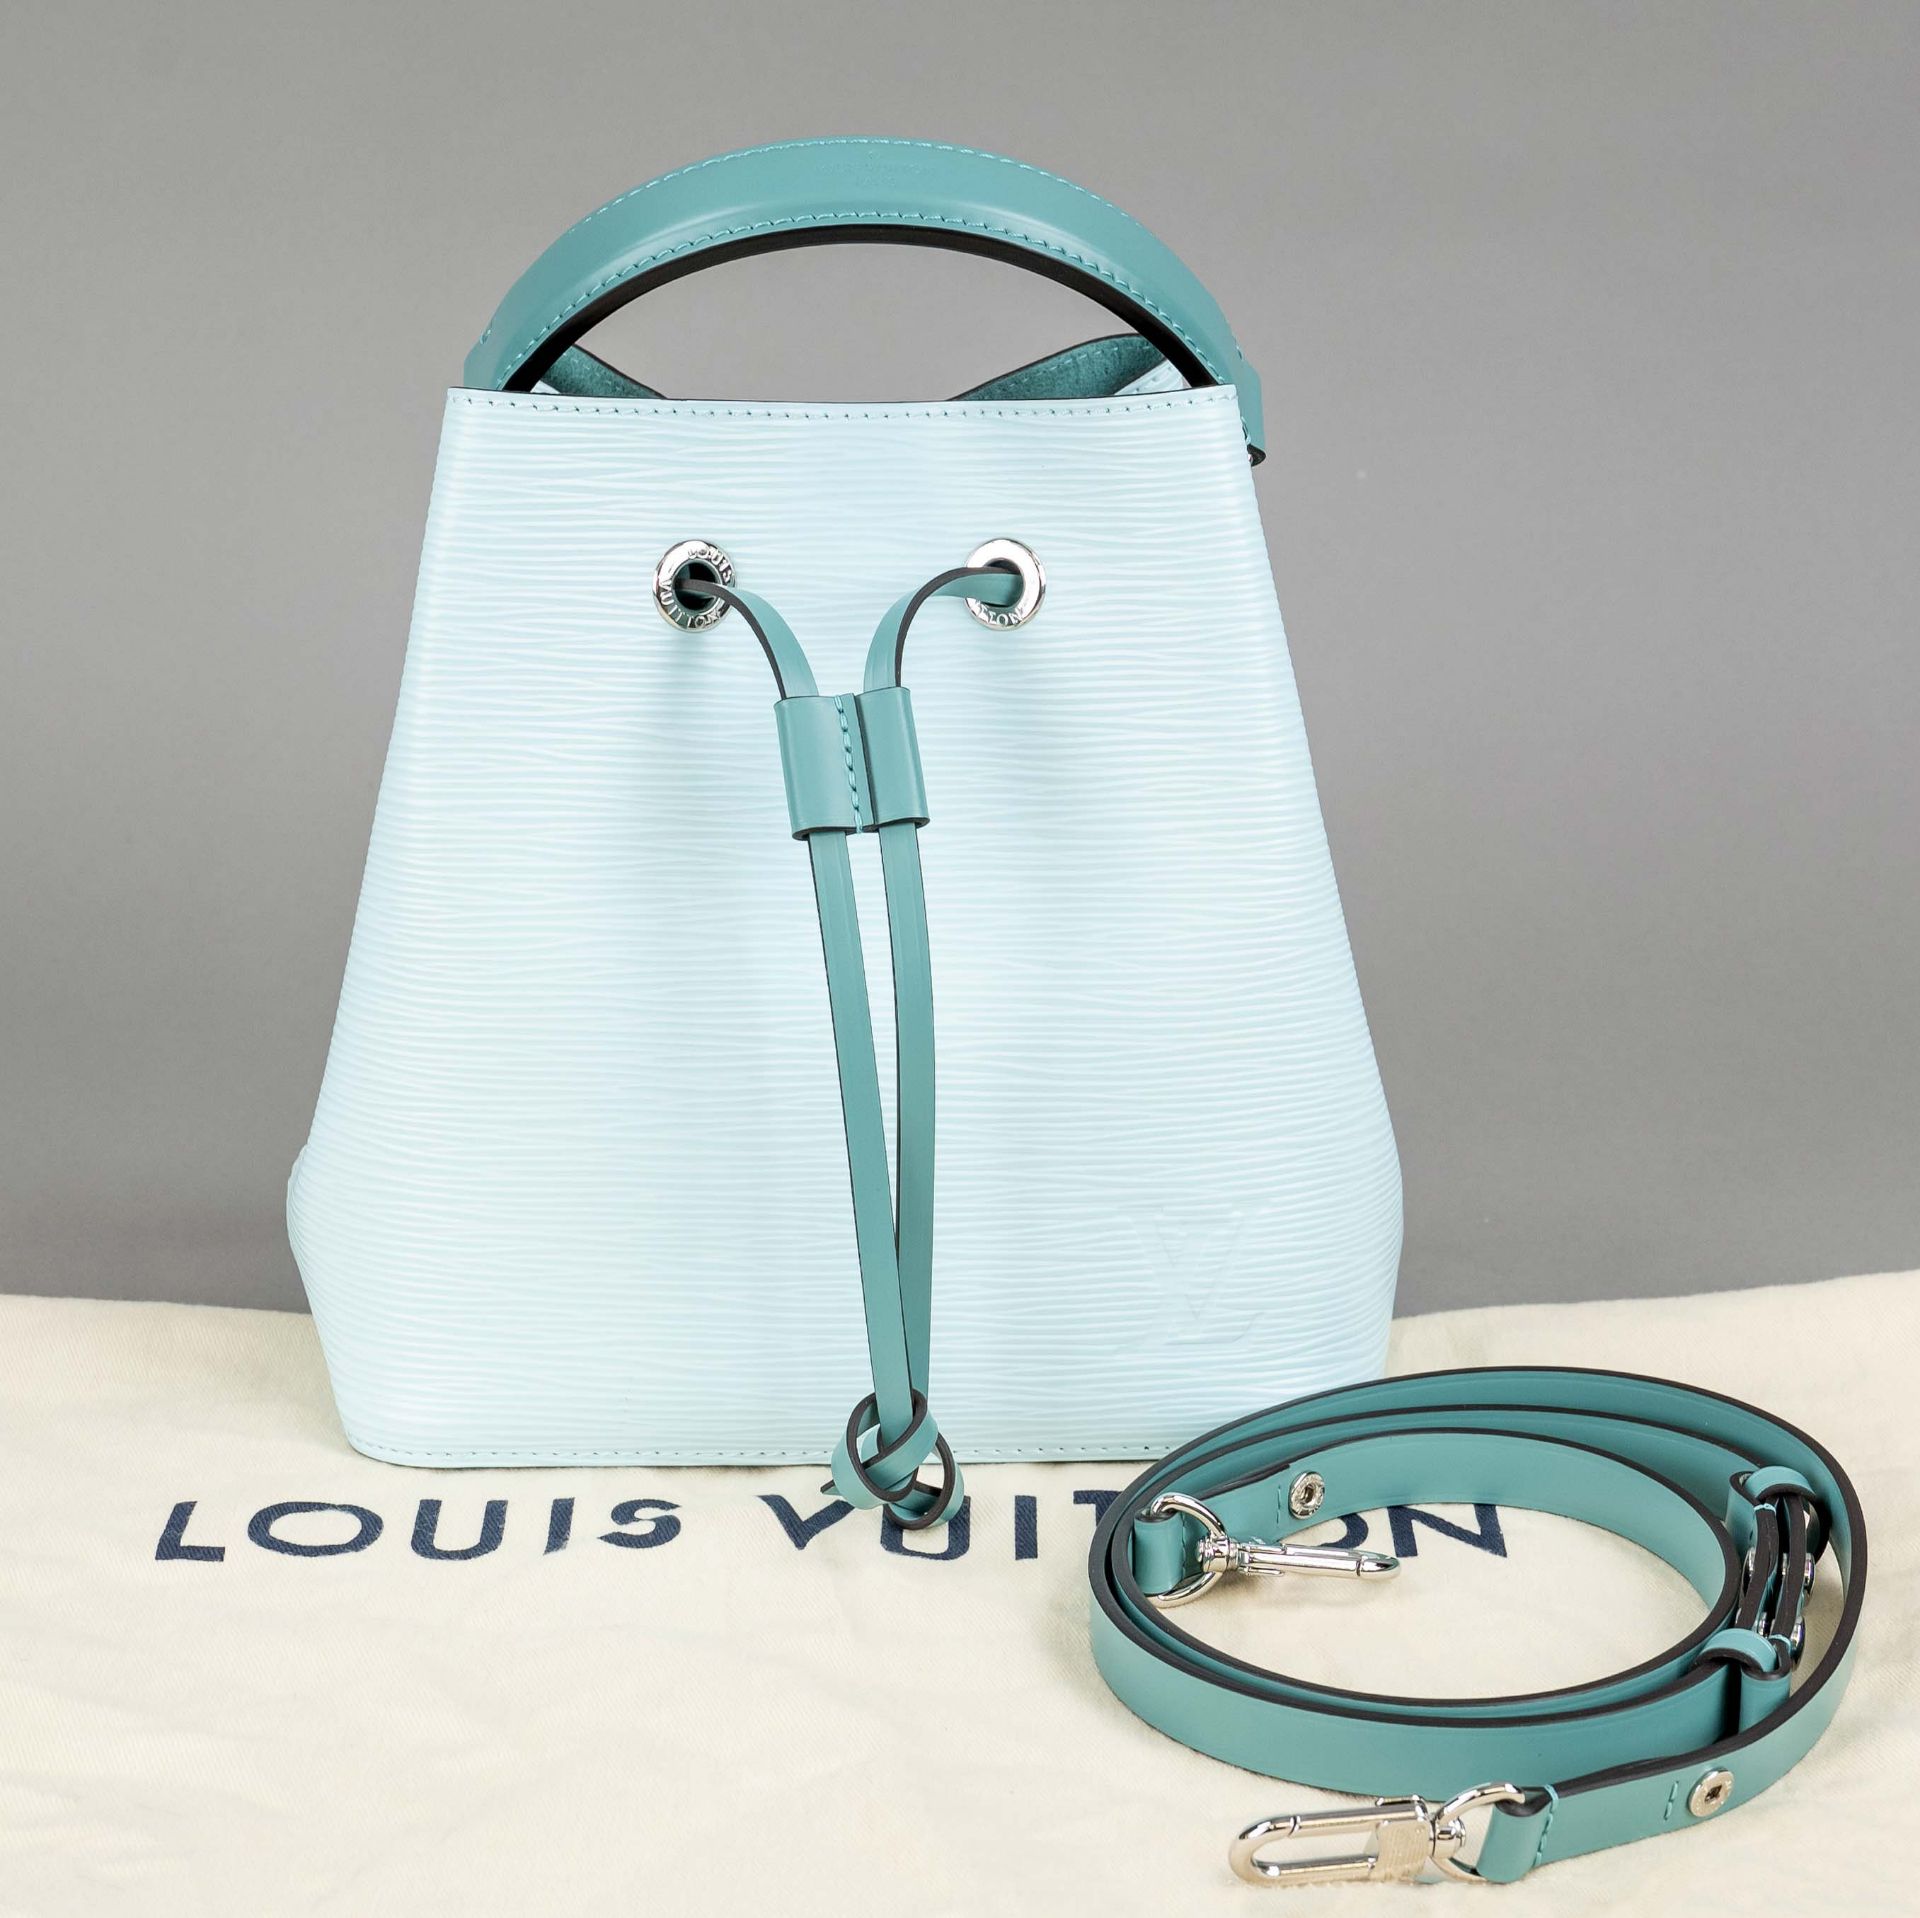 Louis Vuitton, NéoNoé BB Epi Leather Bag in Seaside Blue/Green (out of stock at Louis Vuitton in